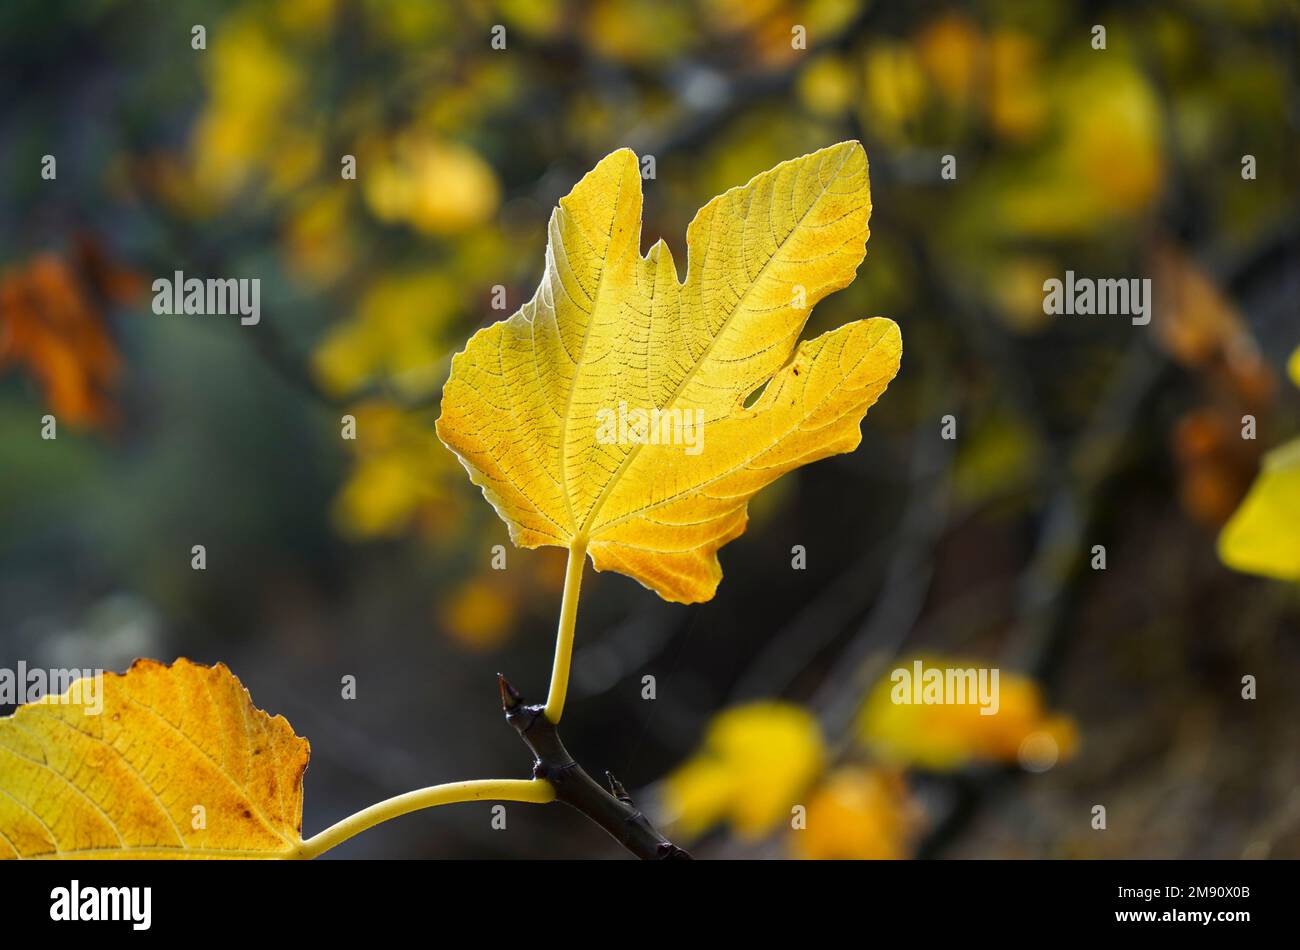 Close-up of a of Common fig leaf backlit by sun, in winter season. Stock Photo